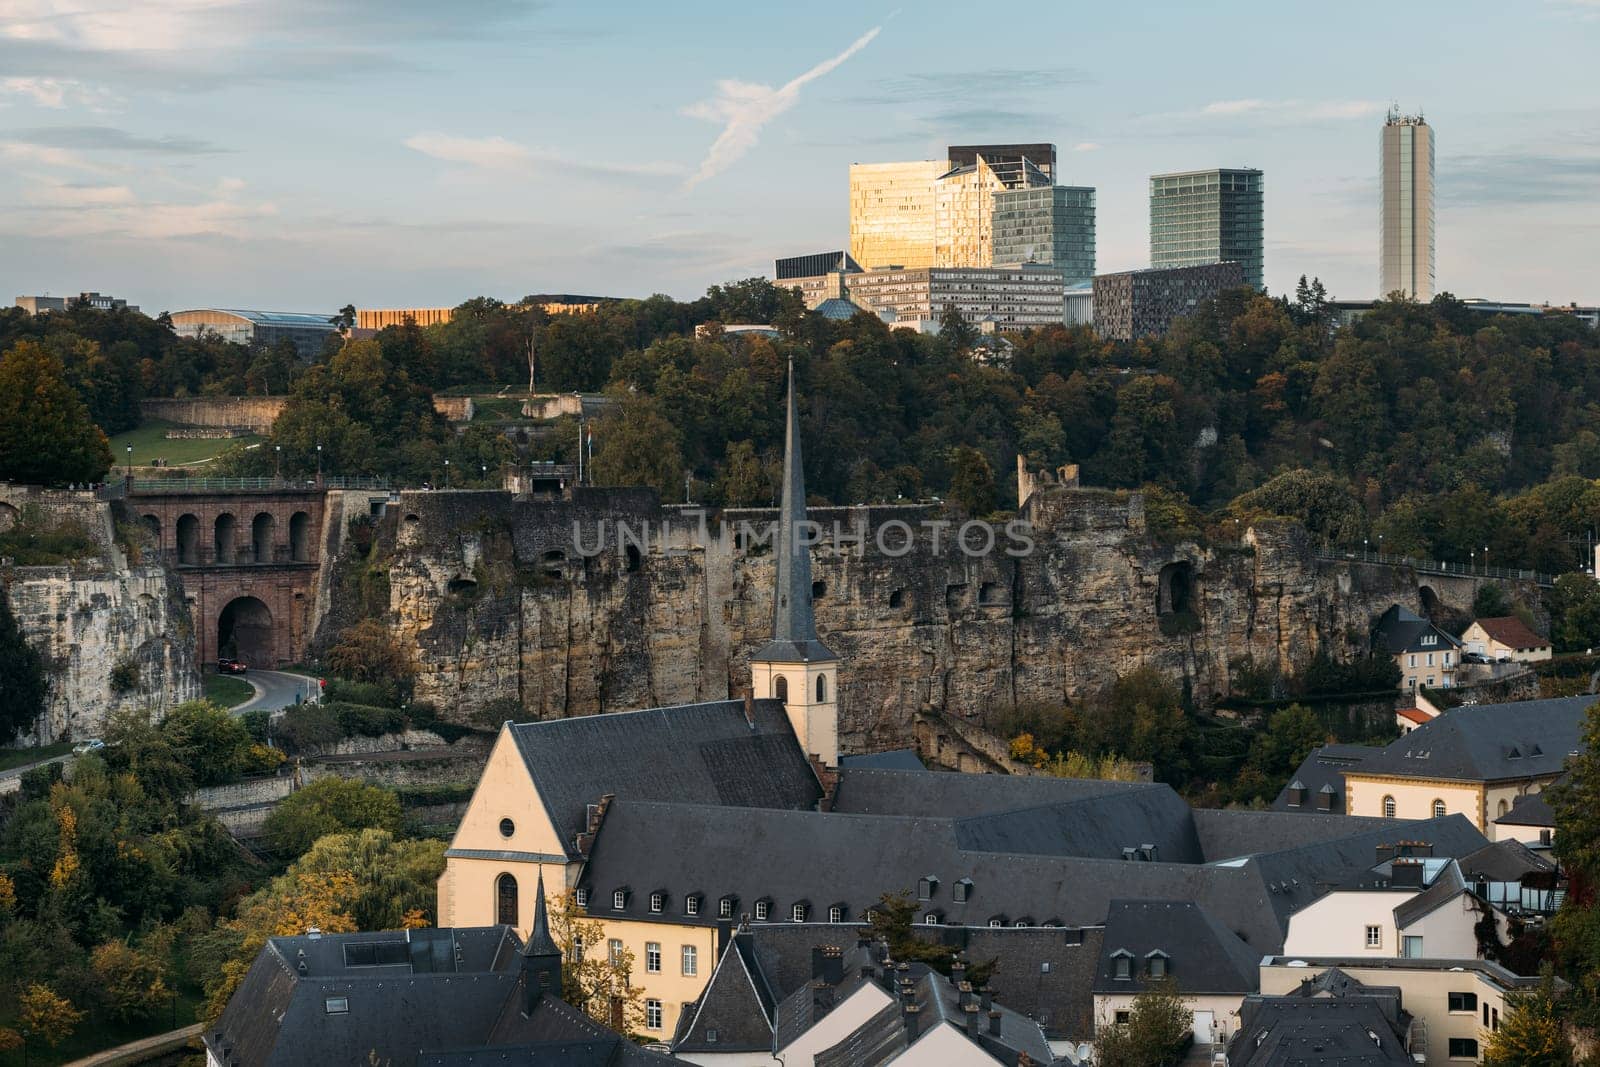 Dwelling constructions from three different periods in Luxemburg city. Combination of castle ruins with old town and modern skyscrapers on hill slope